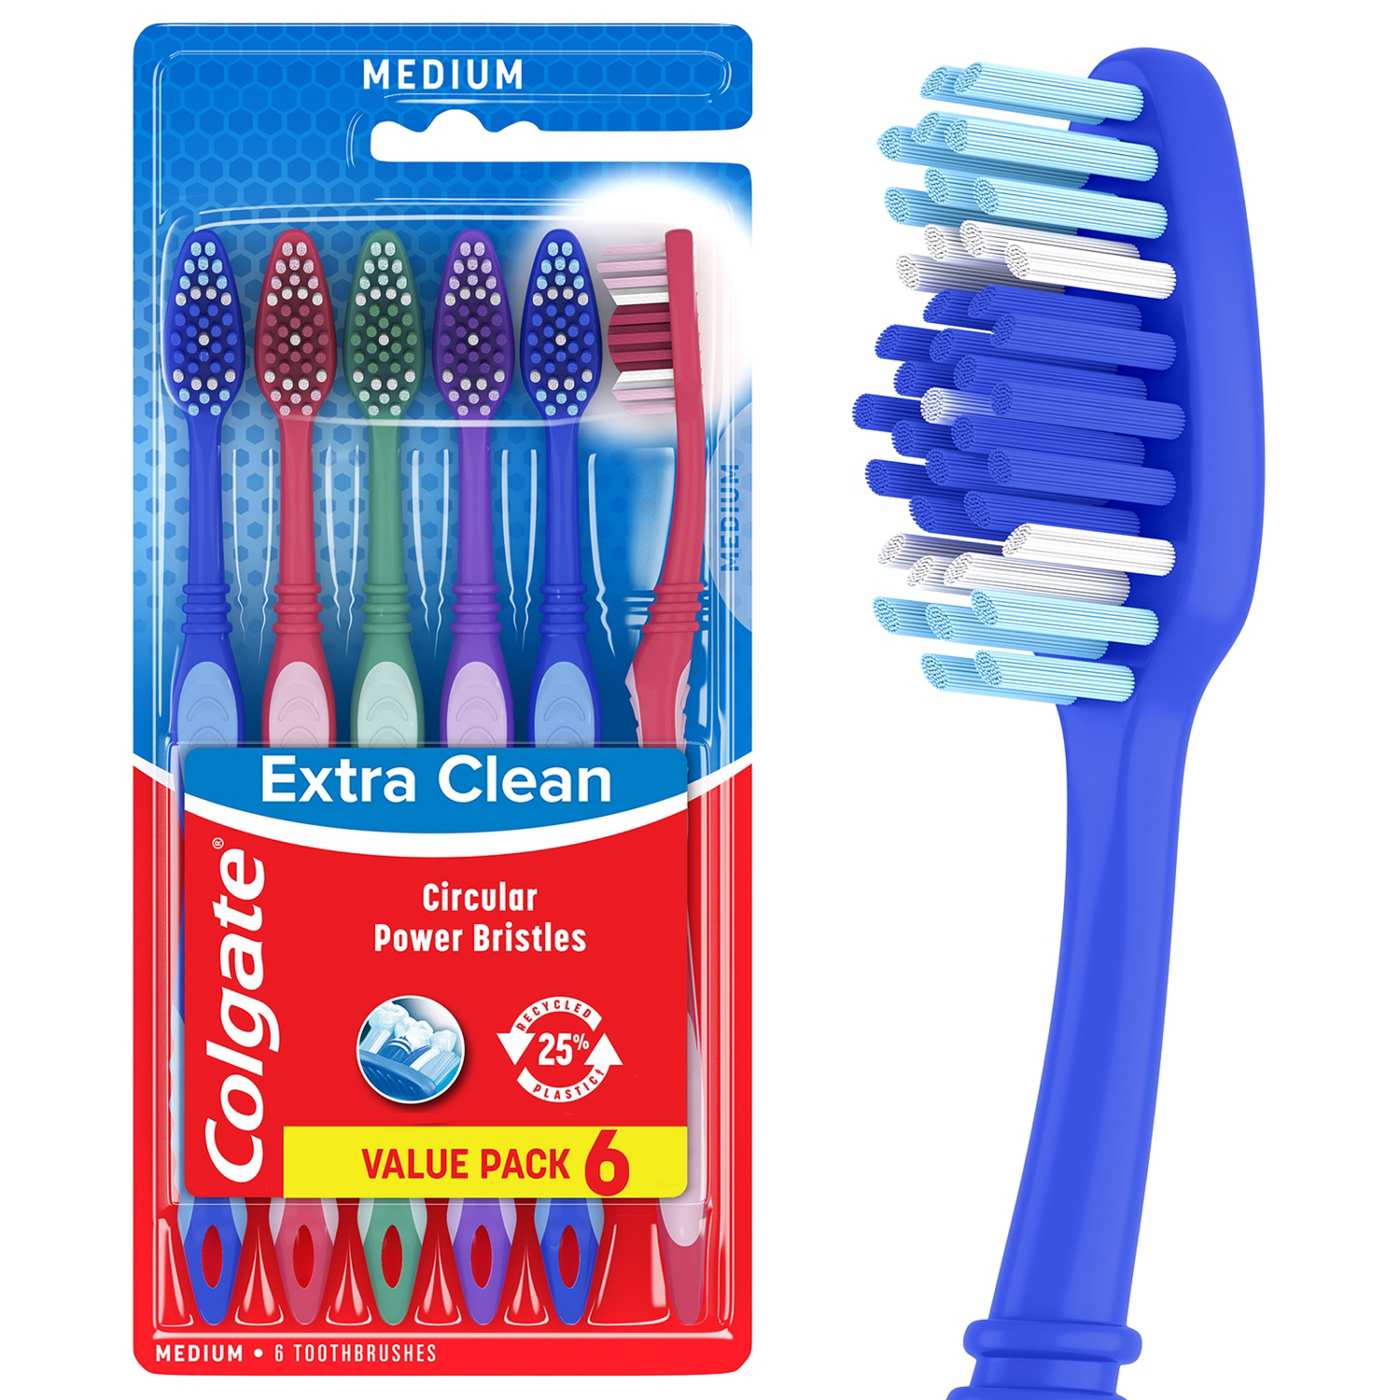 Colgate Extra Clean Toothbrushes - Medium; image 6 of 8